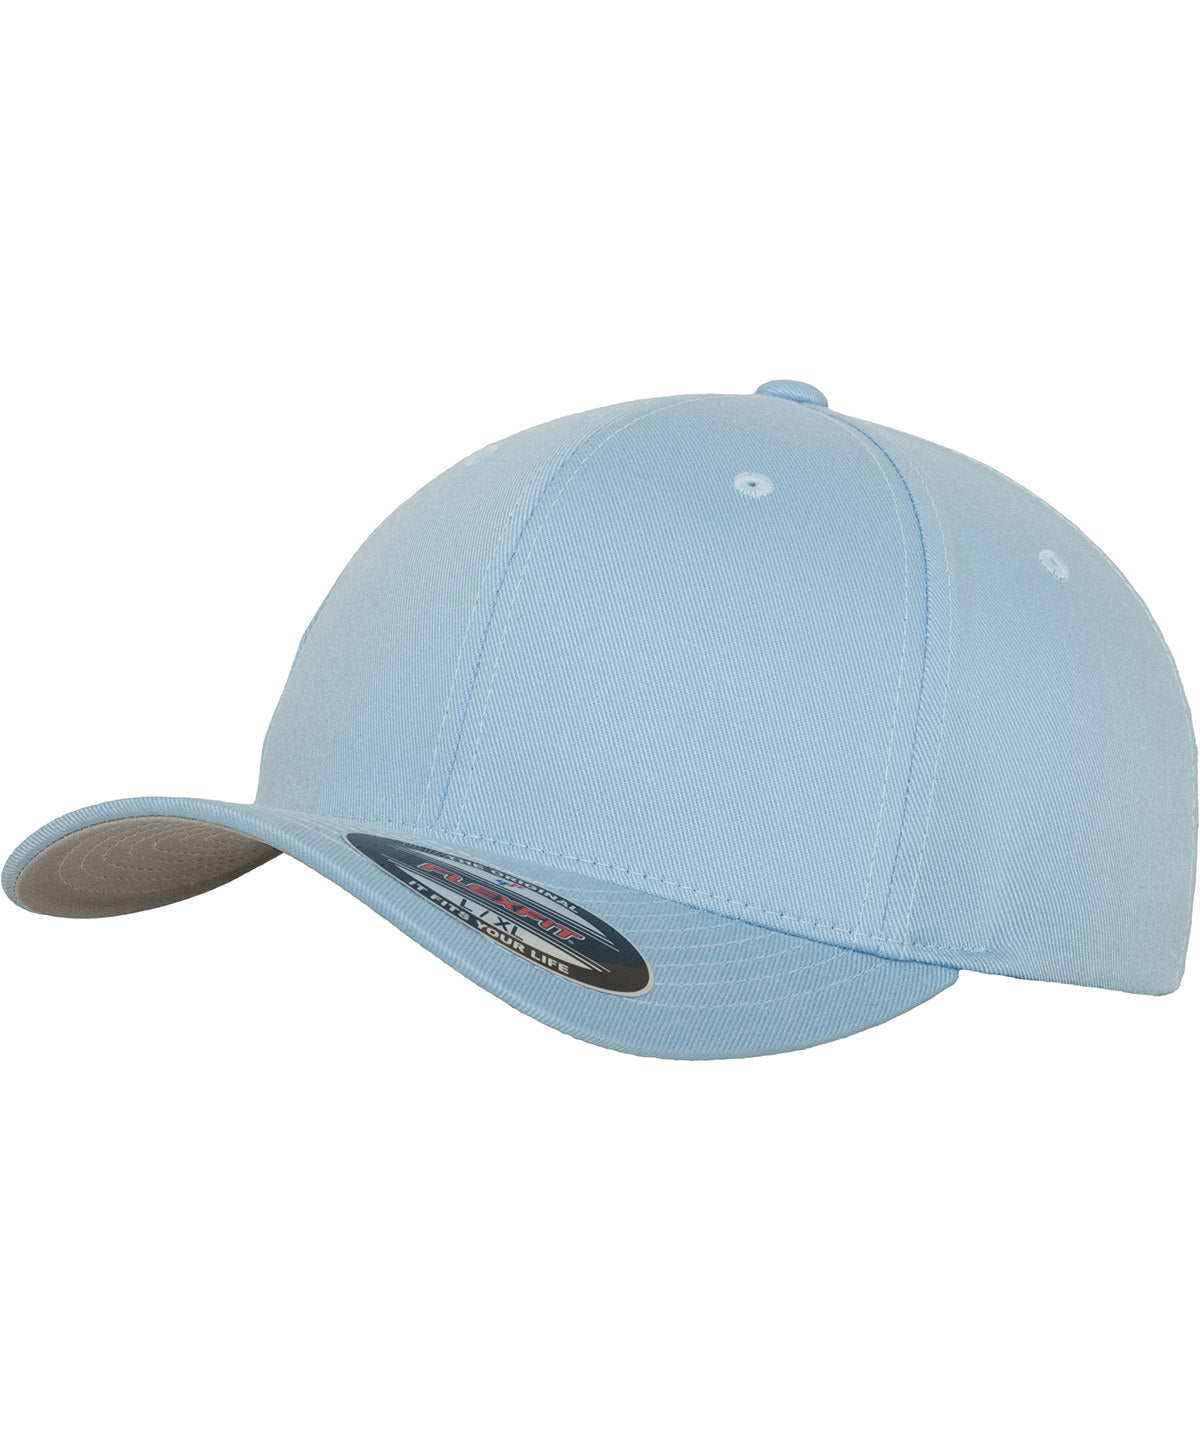 Carolina Blue - Flexfit fitted baseball cap (6277) Caps Flexfit by Yupoong 2022 Spring Edit, Headwear, Must Haves, New Colours for 2023, Rebrandable, Summer Accessories Schoolwear Centres